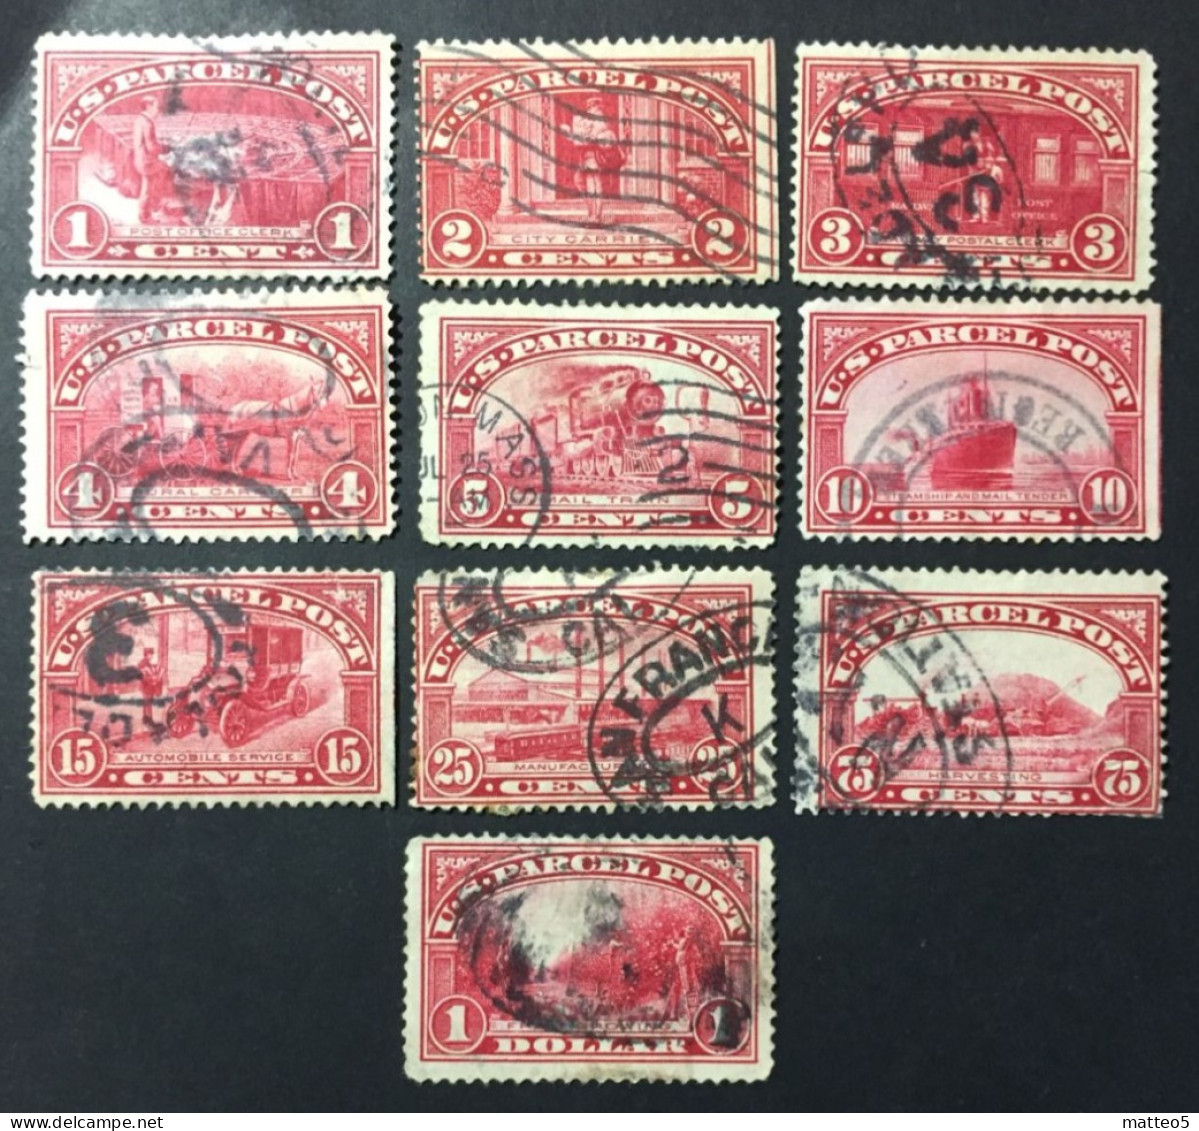 1912 - United States - Parcel Post Colonies Postage Due With - 10 Stamps - Used - Dienstzegels